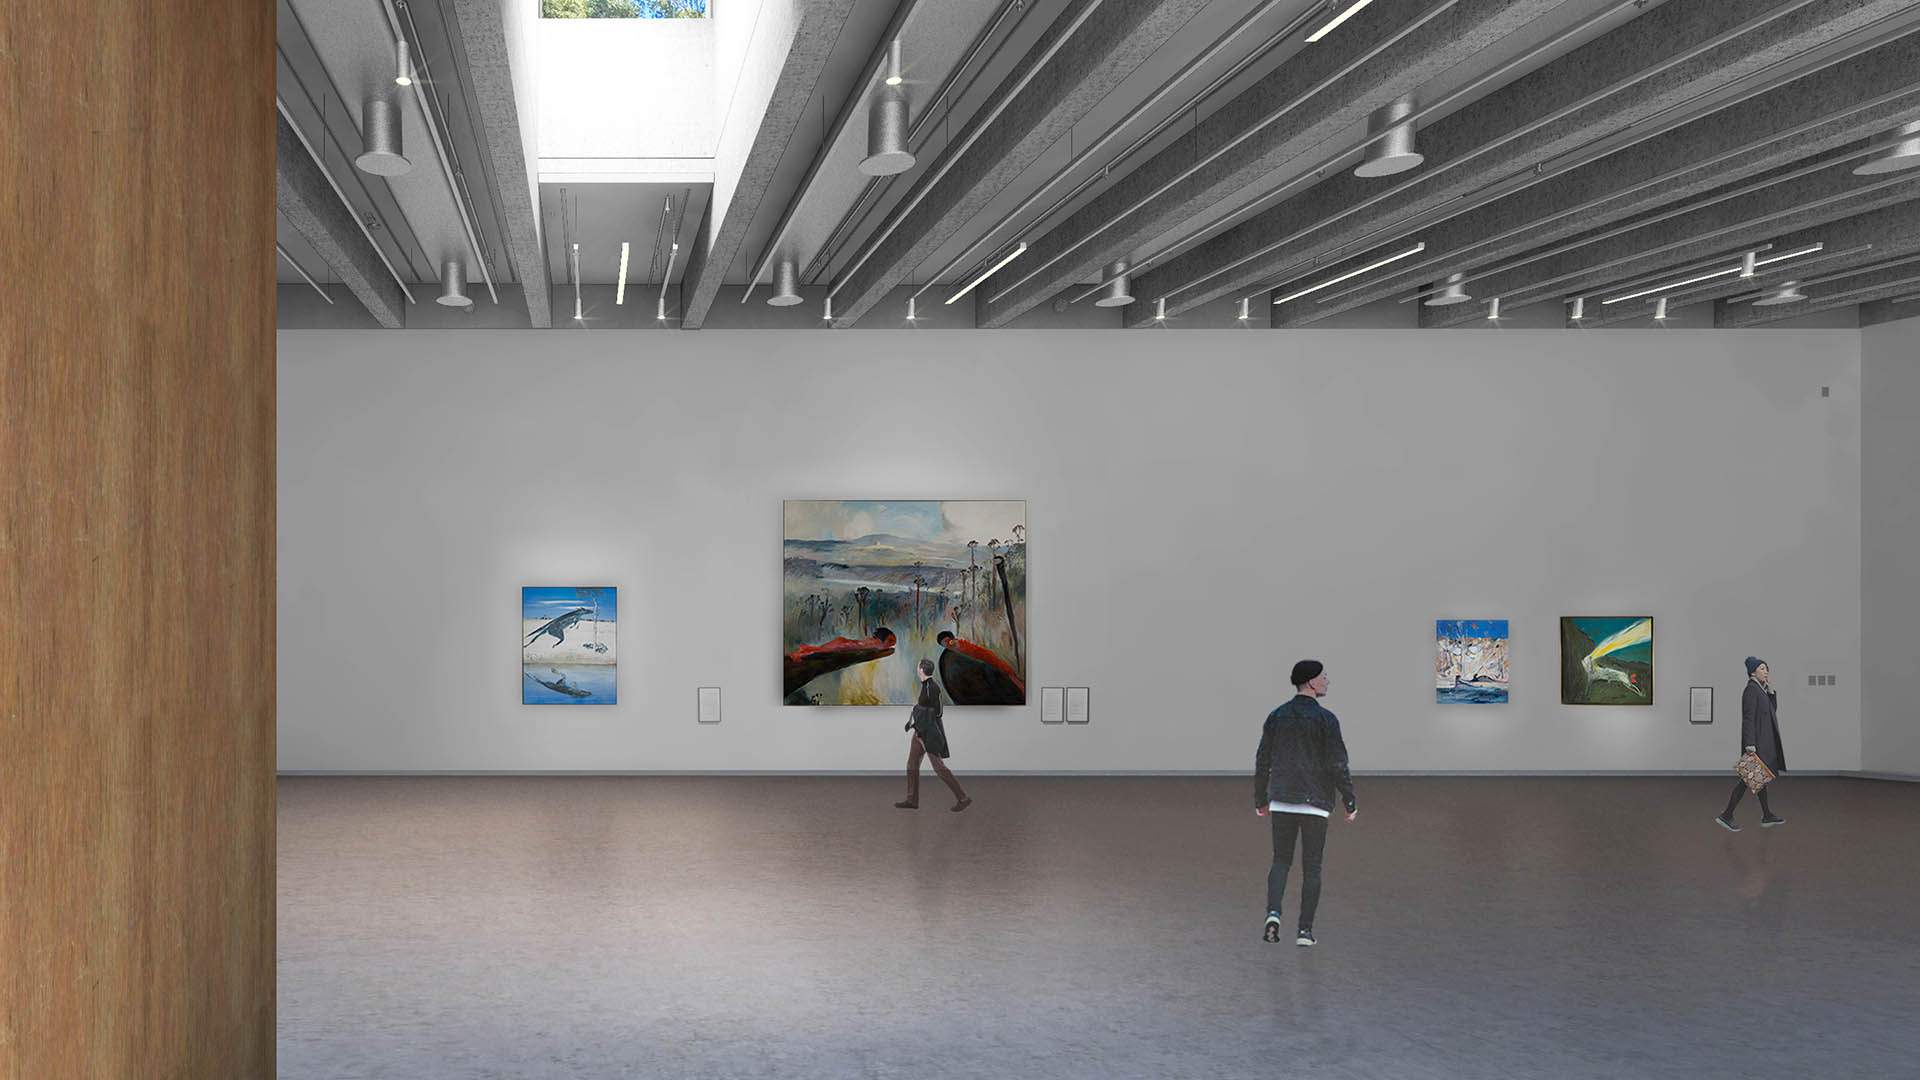 This Is What Australia's Huge New Bushland Art Gallery Will Look Like